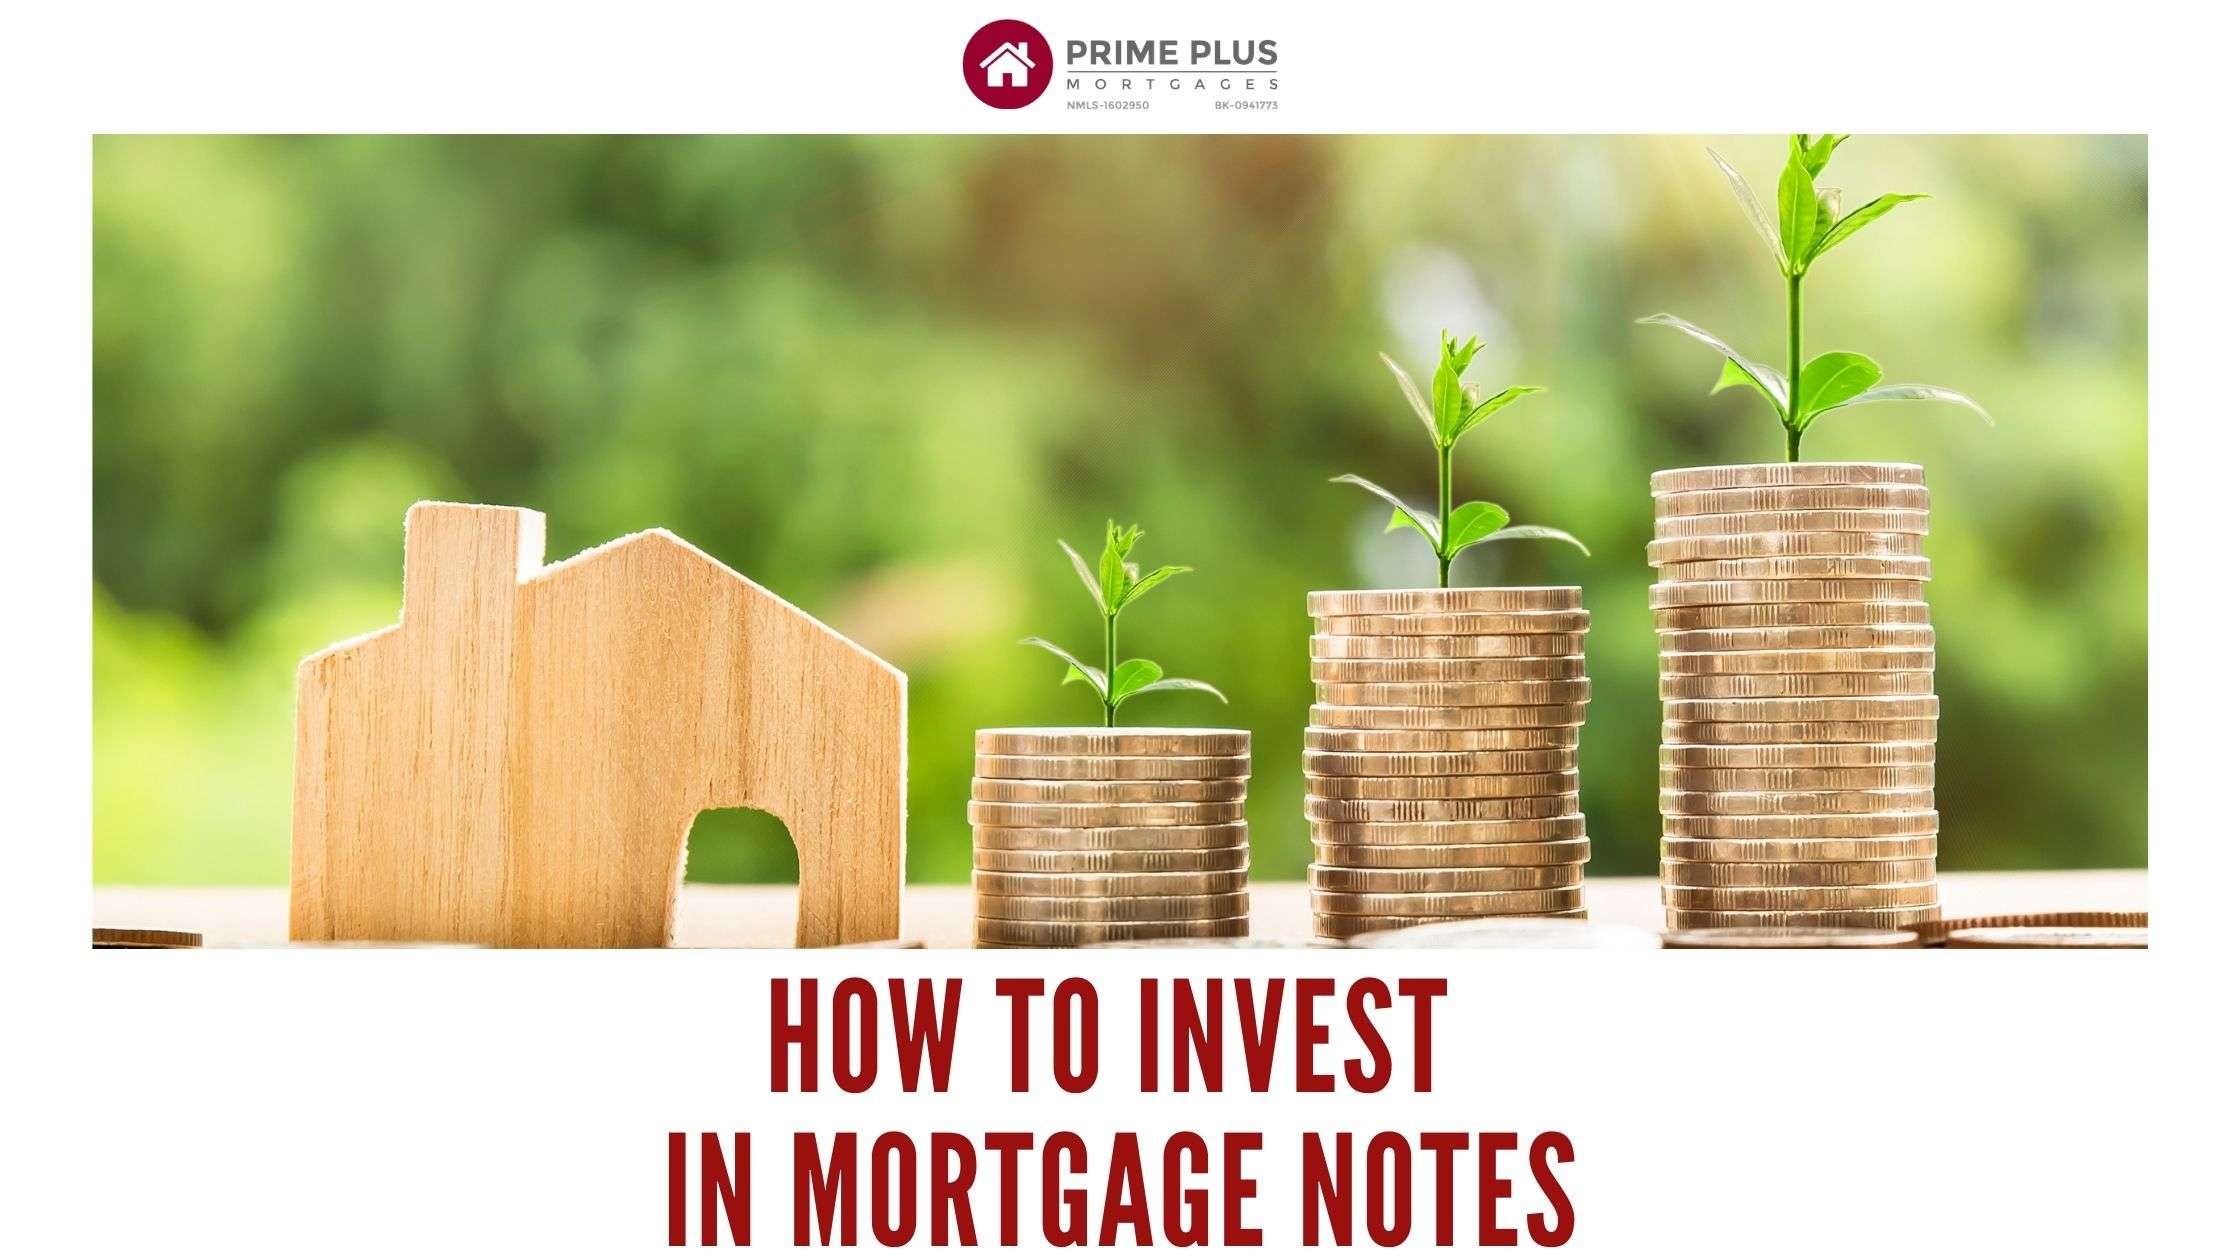 How To Invest In Mortgage Notes â¢ Prime Plus Mortgages